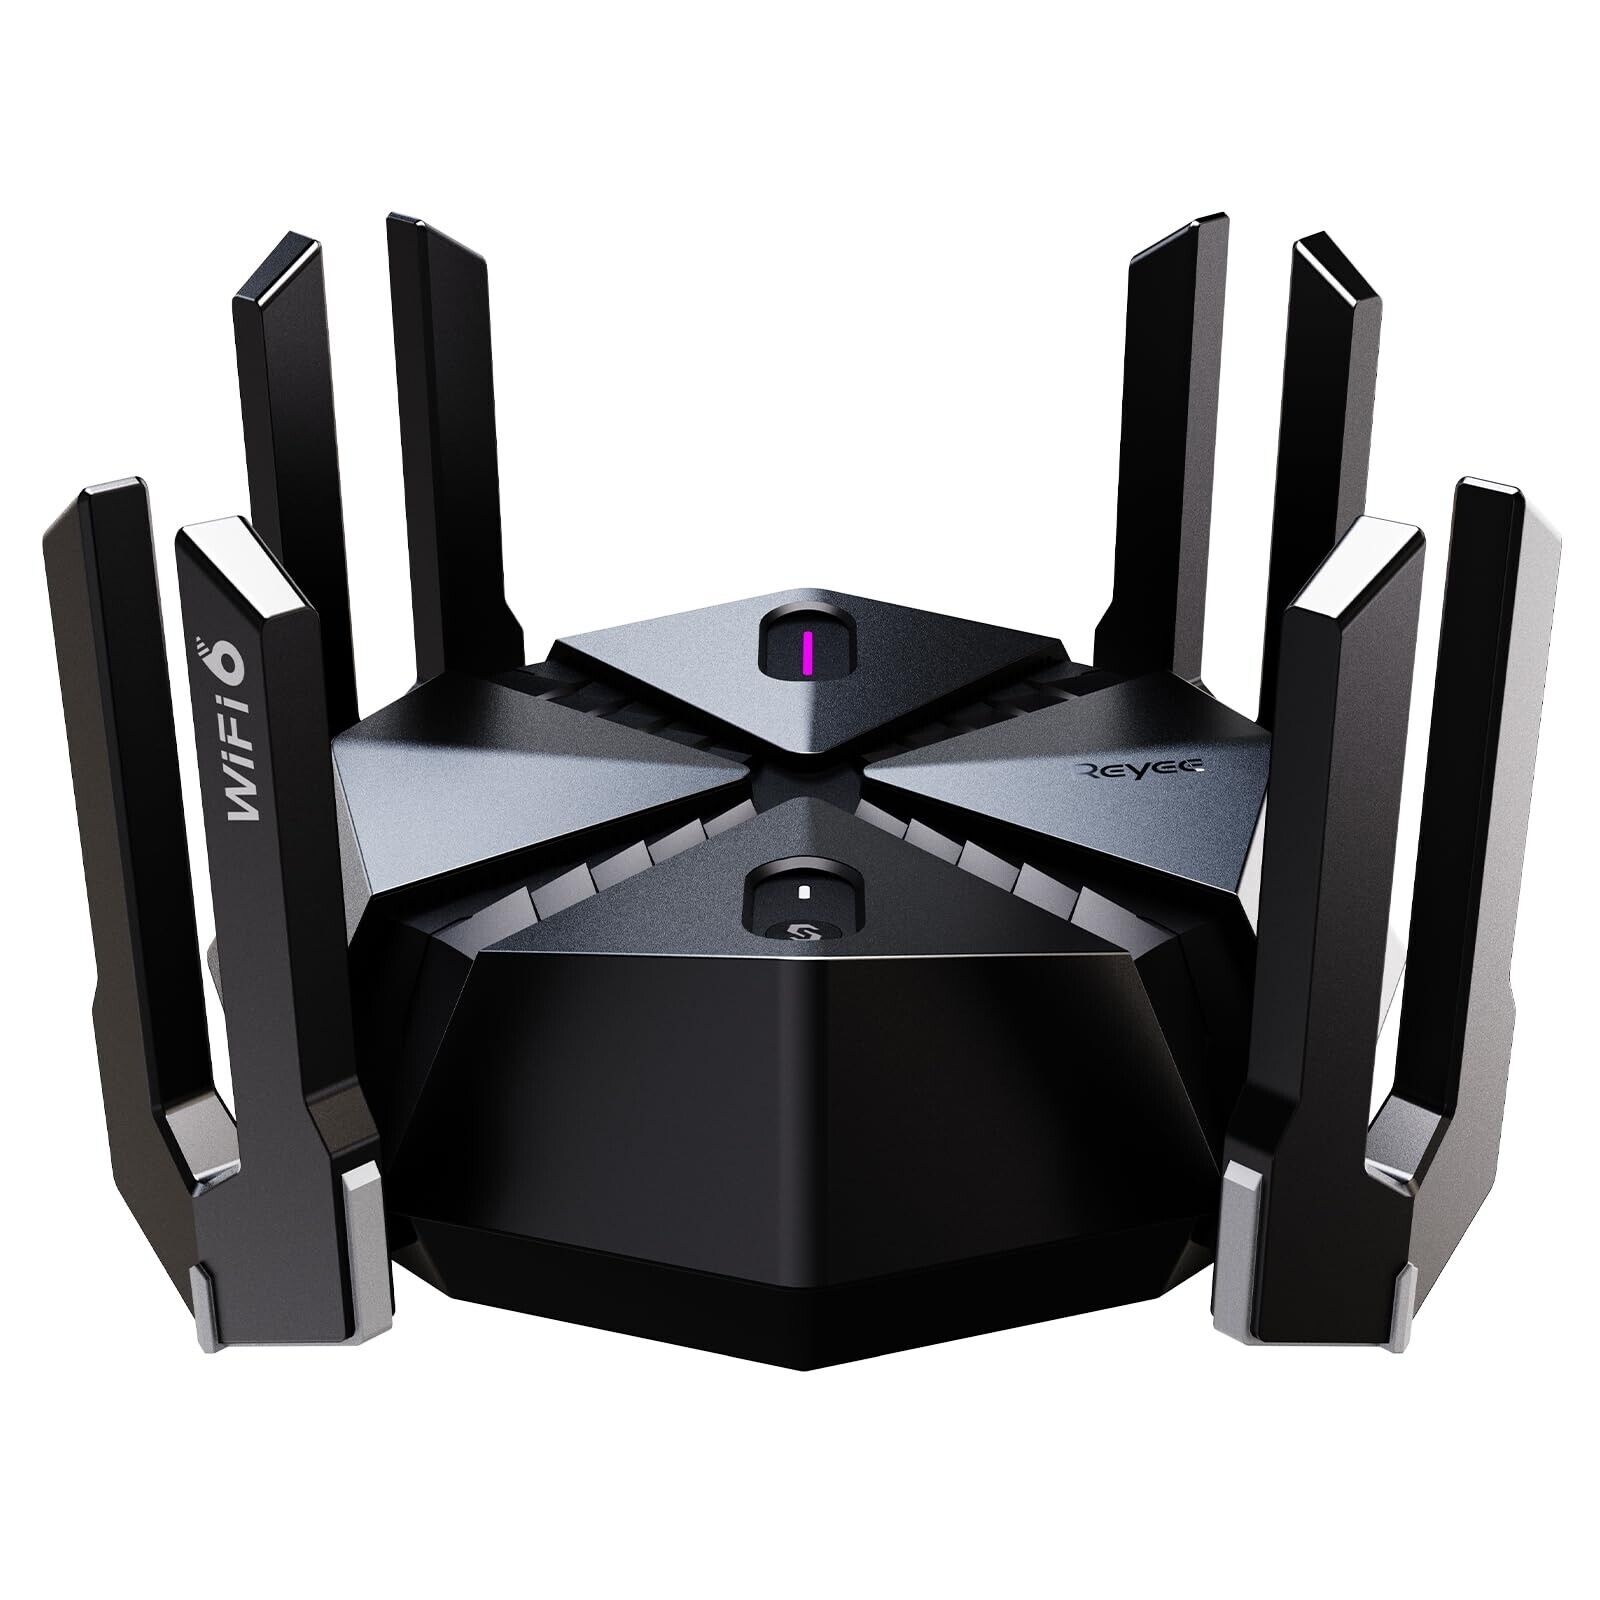 Reyee AX6000 WiFi 6 Router, Wireless 8-Stream Gaming Router, 8 FEMs, 2.5G WAN...